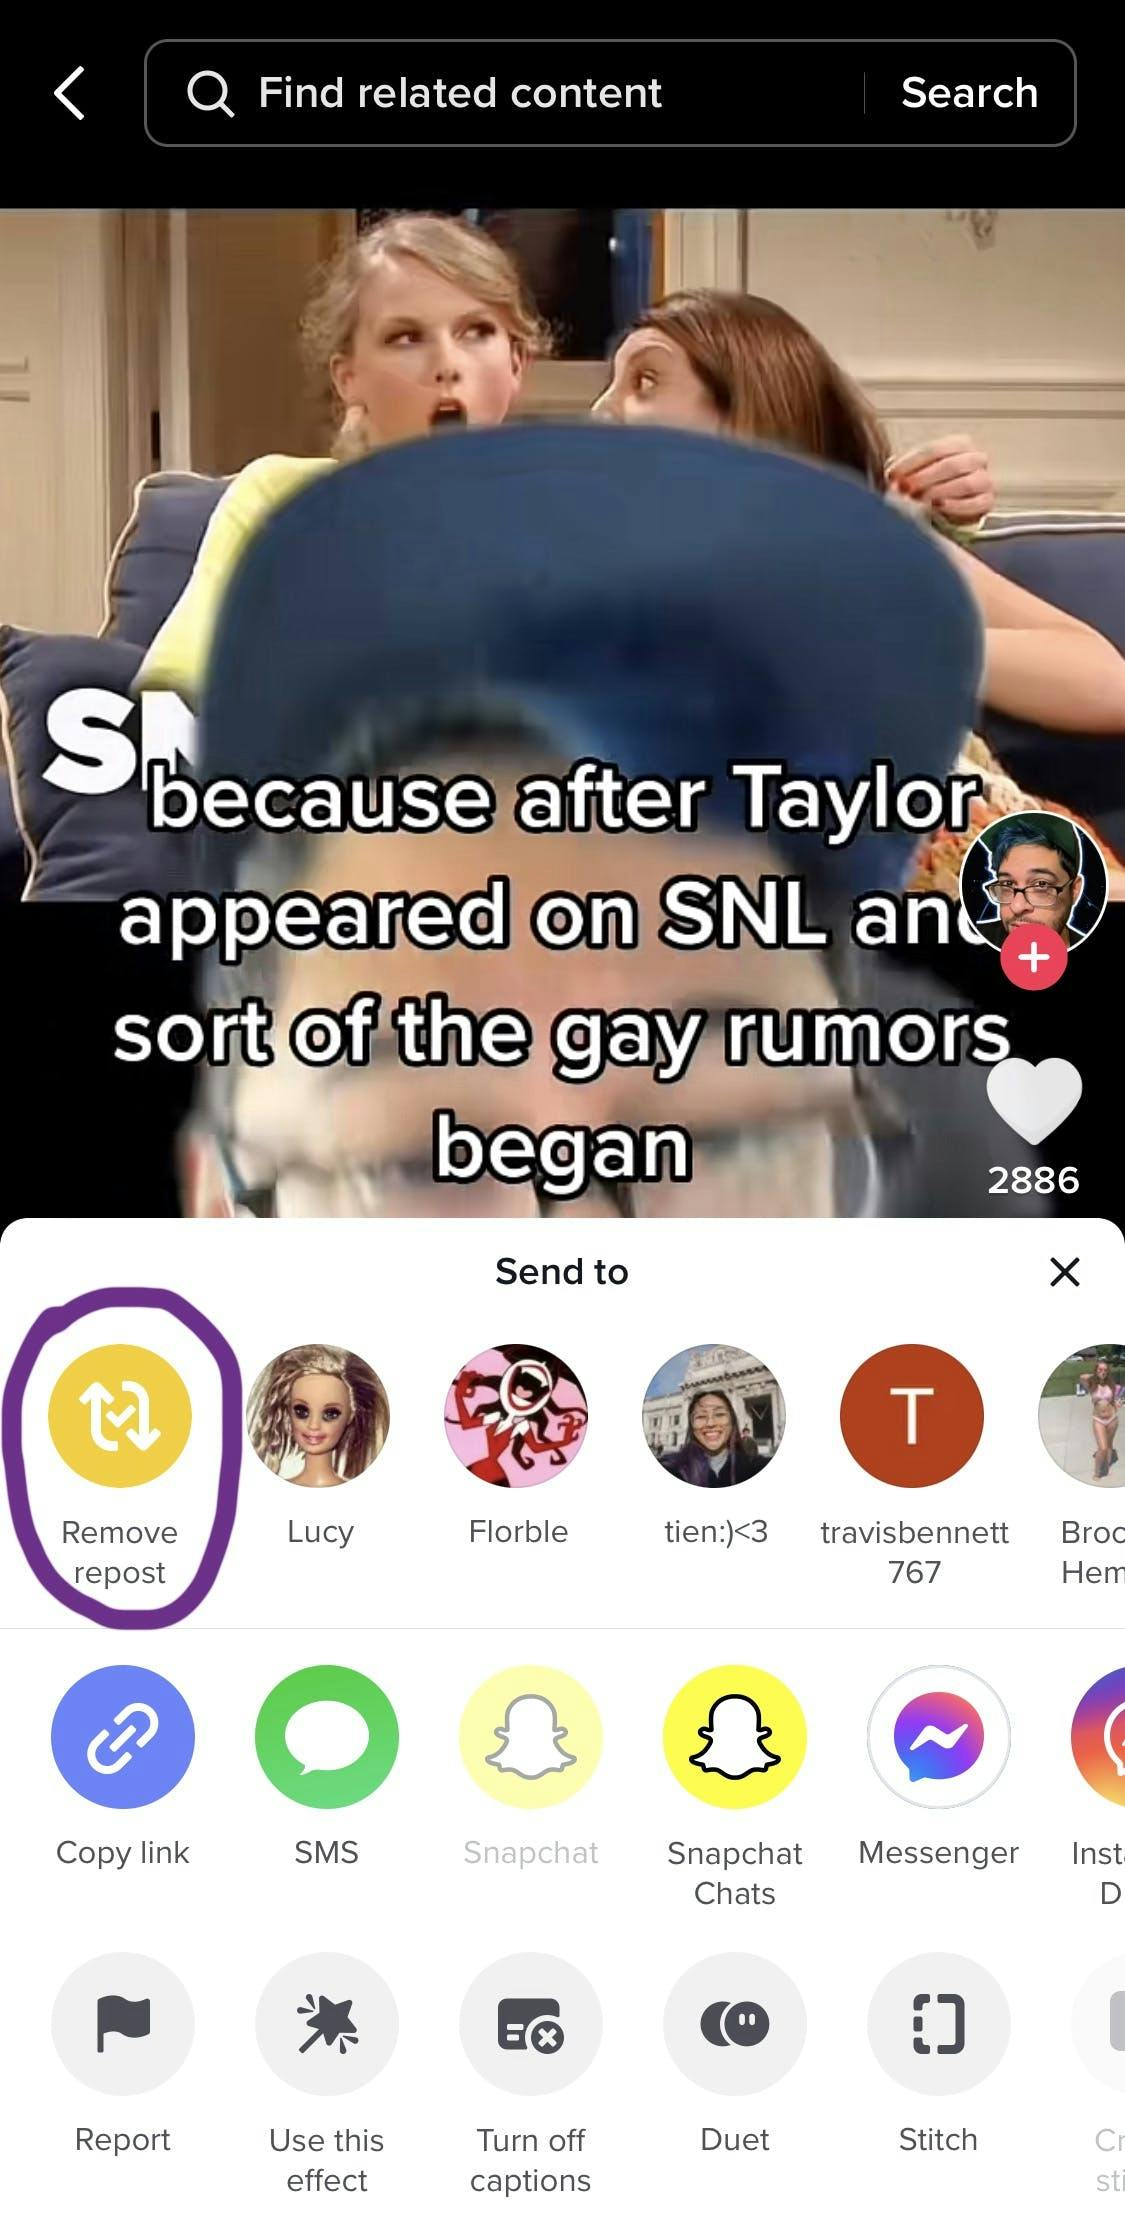 A TikTok video with "Remove repost" circled